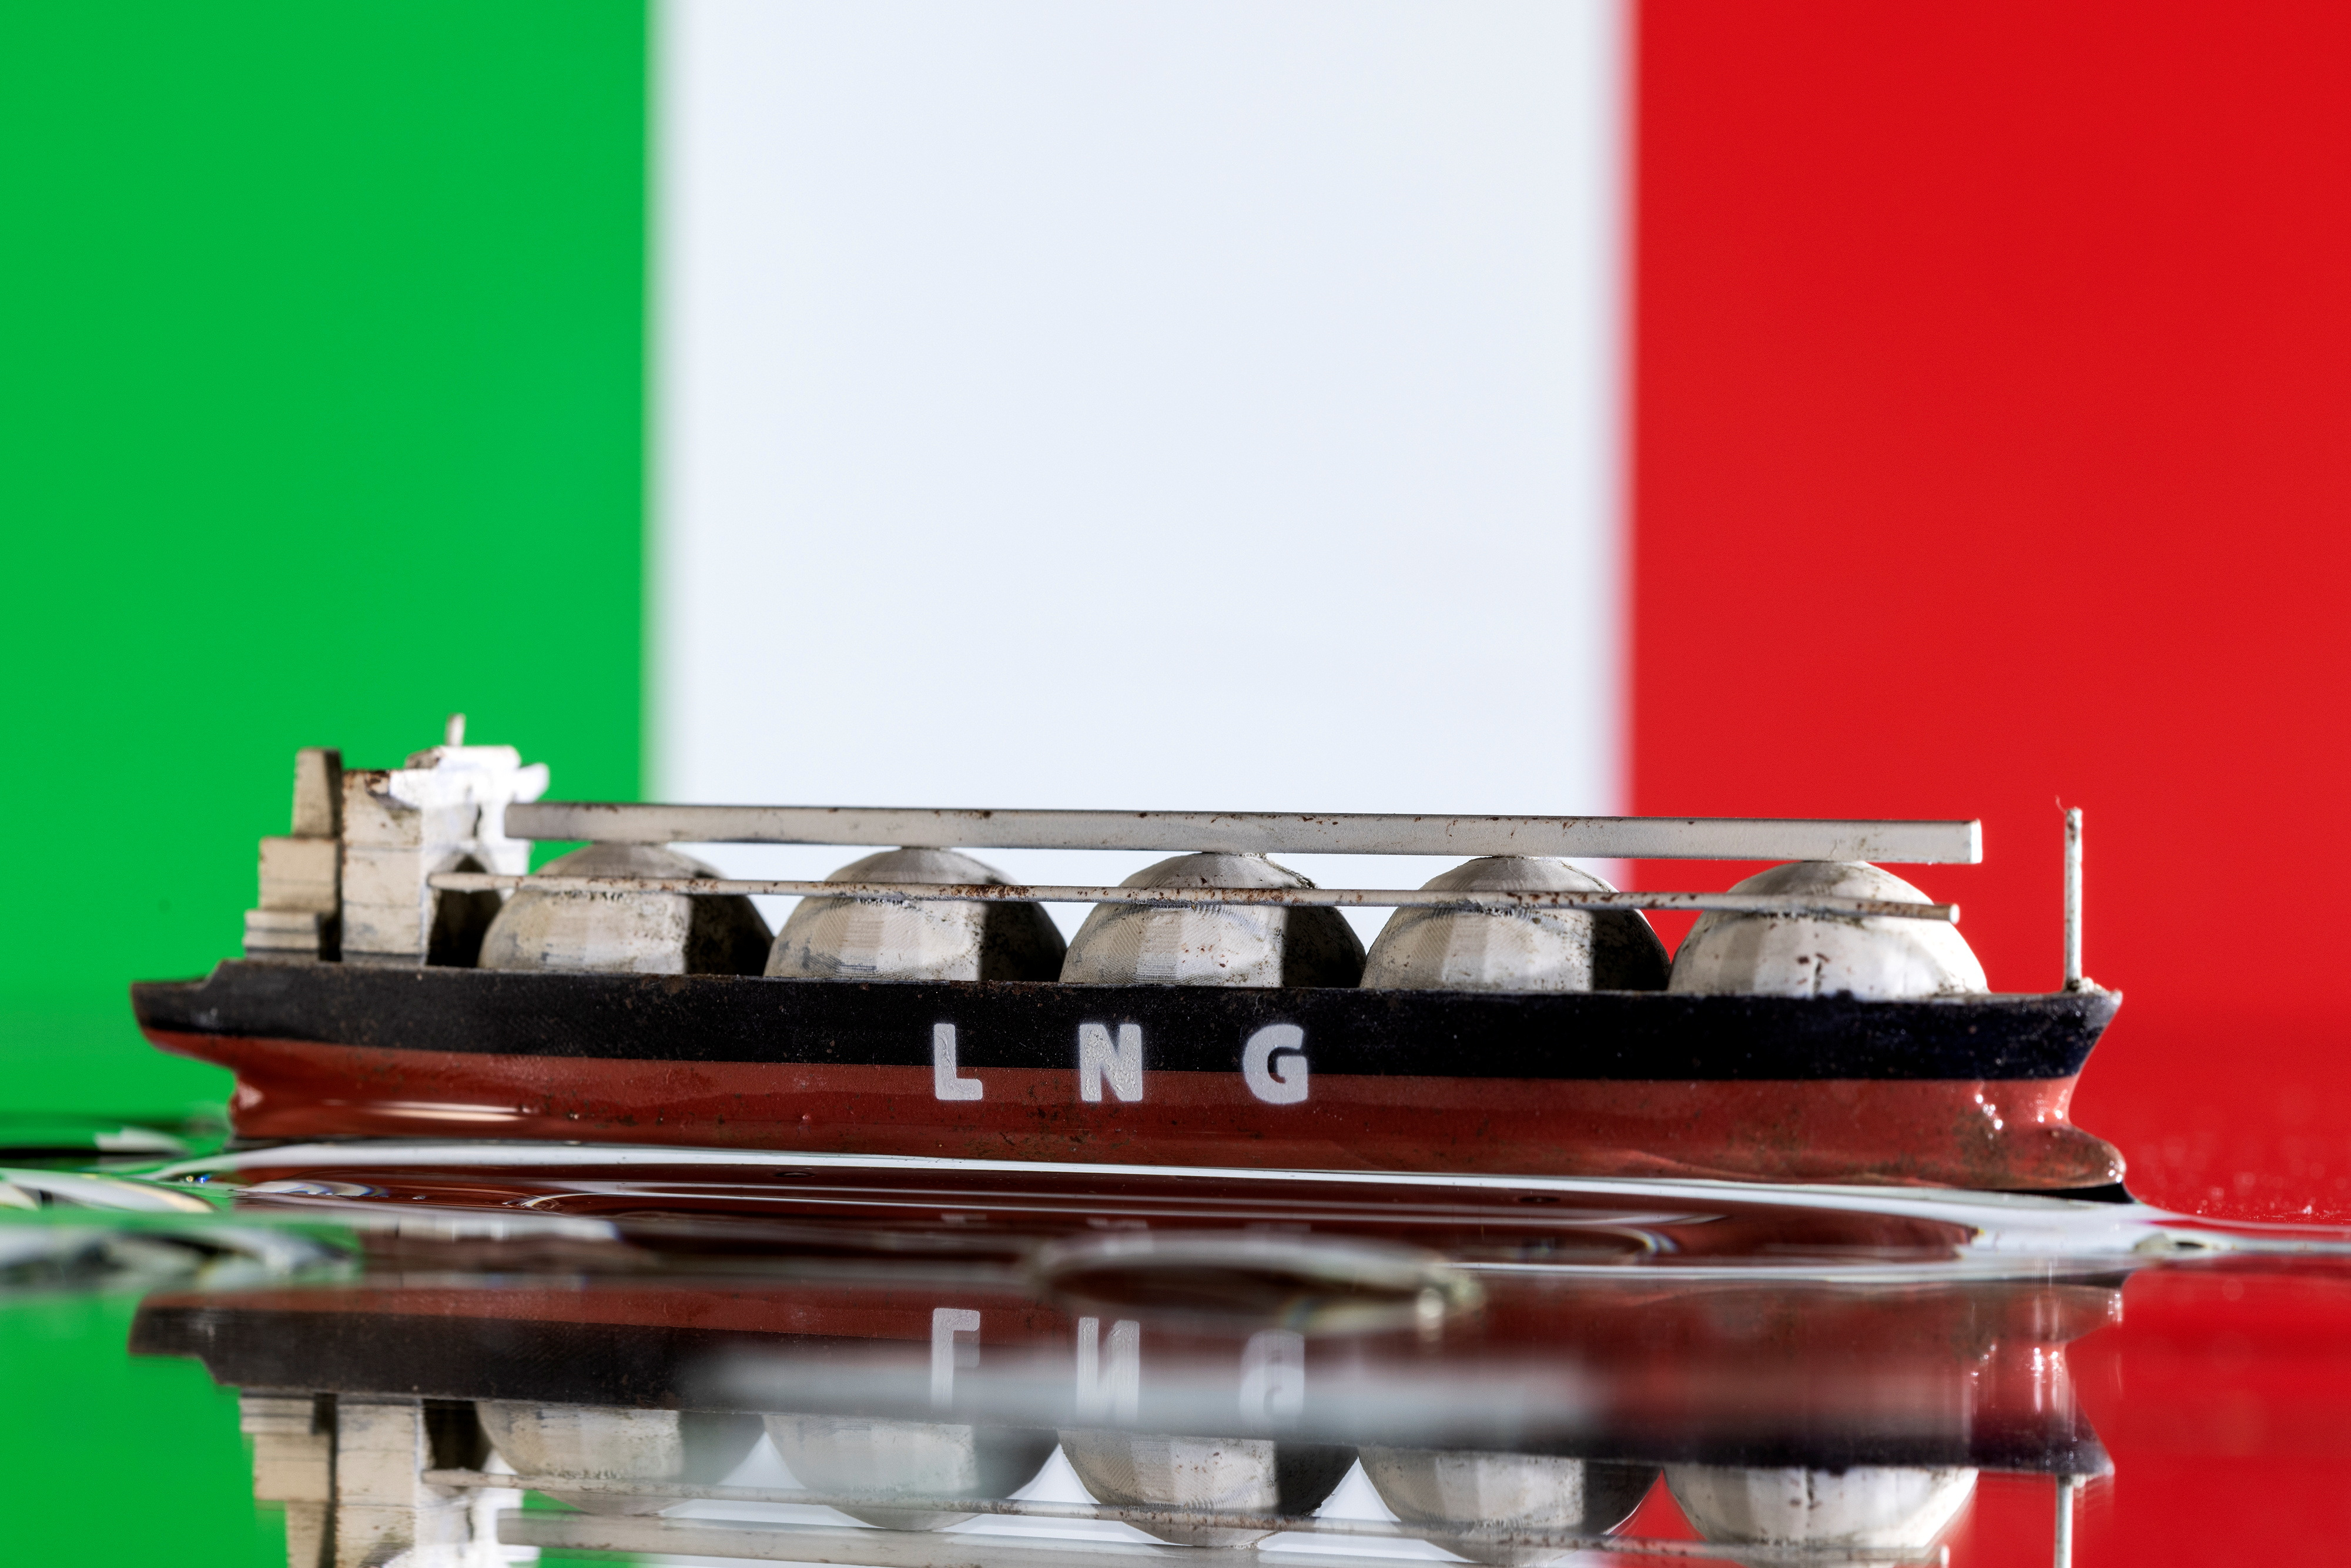 Illustration shows model of LNG tanker and Italy's flag